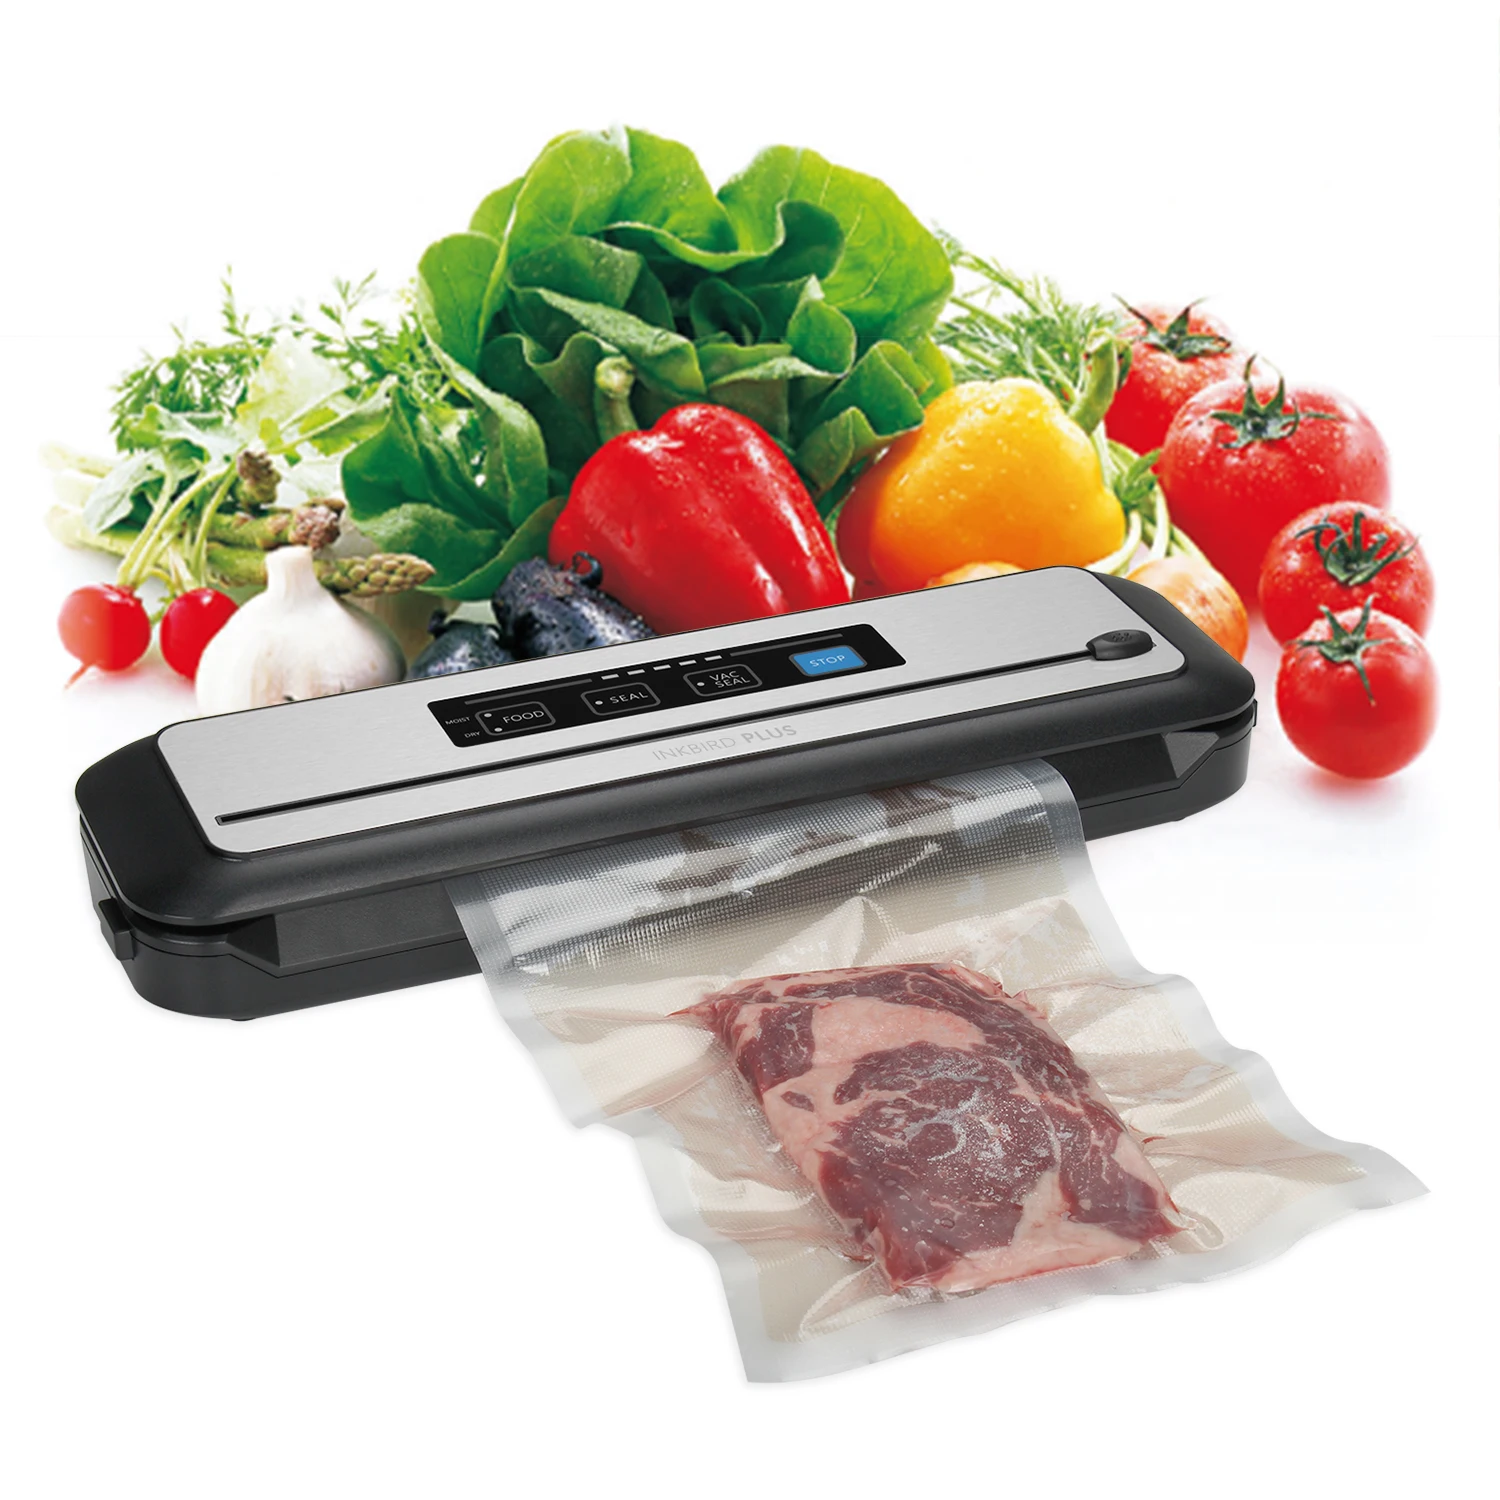 INKBIRD INK-VS01 Vacuum Sealer Best Automatic Sealing Machine for Food Preservation with Dry&Moist Modes Built-in Cutter